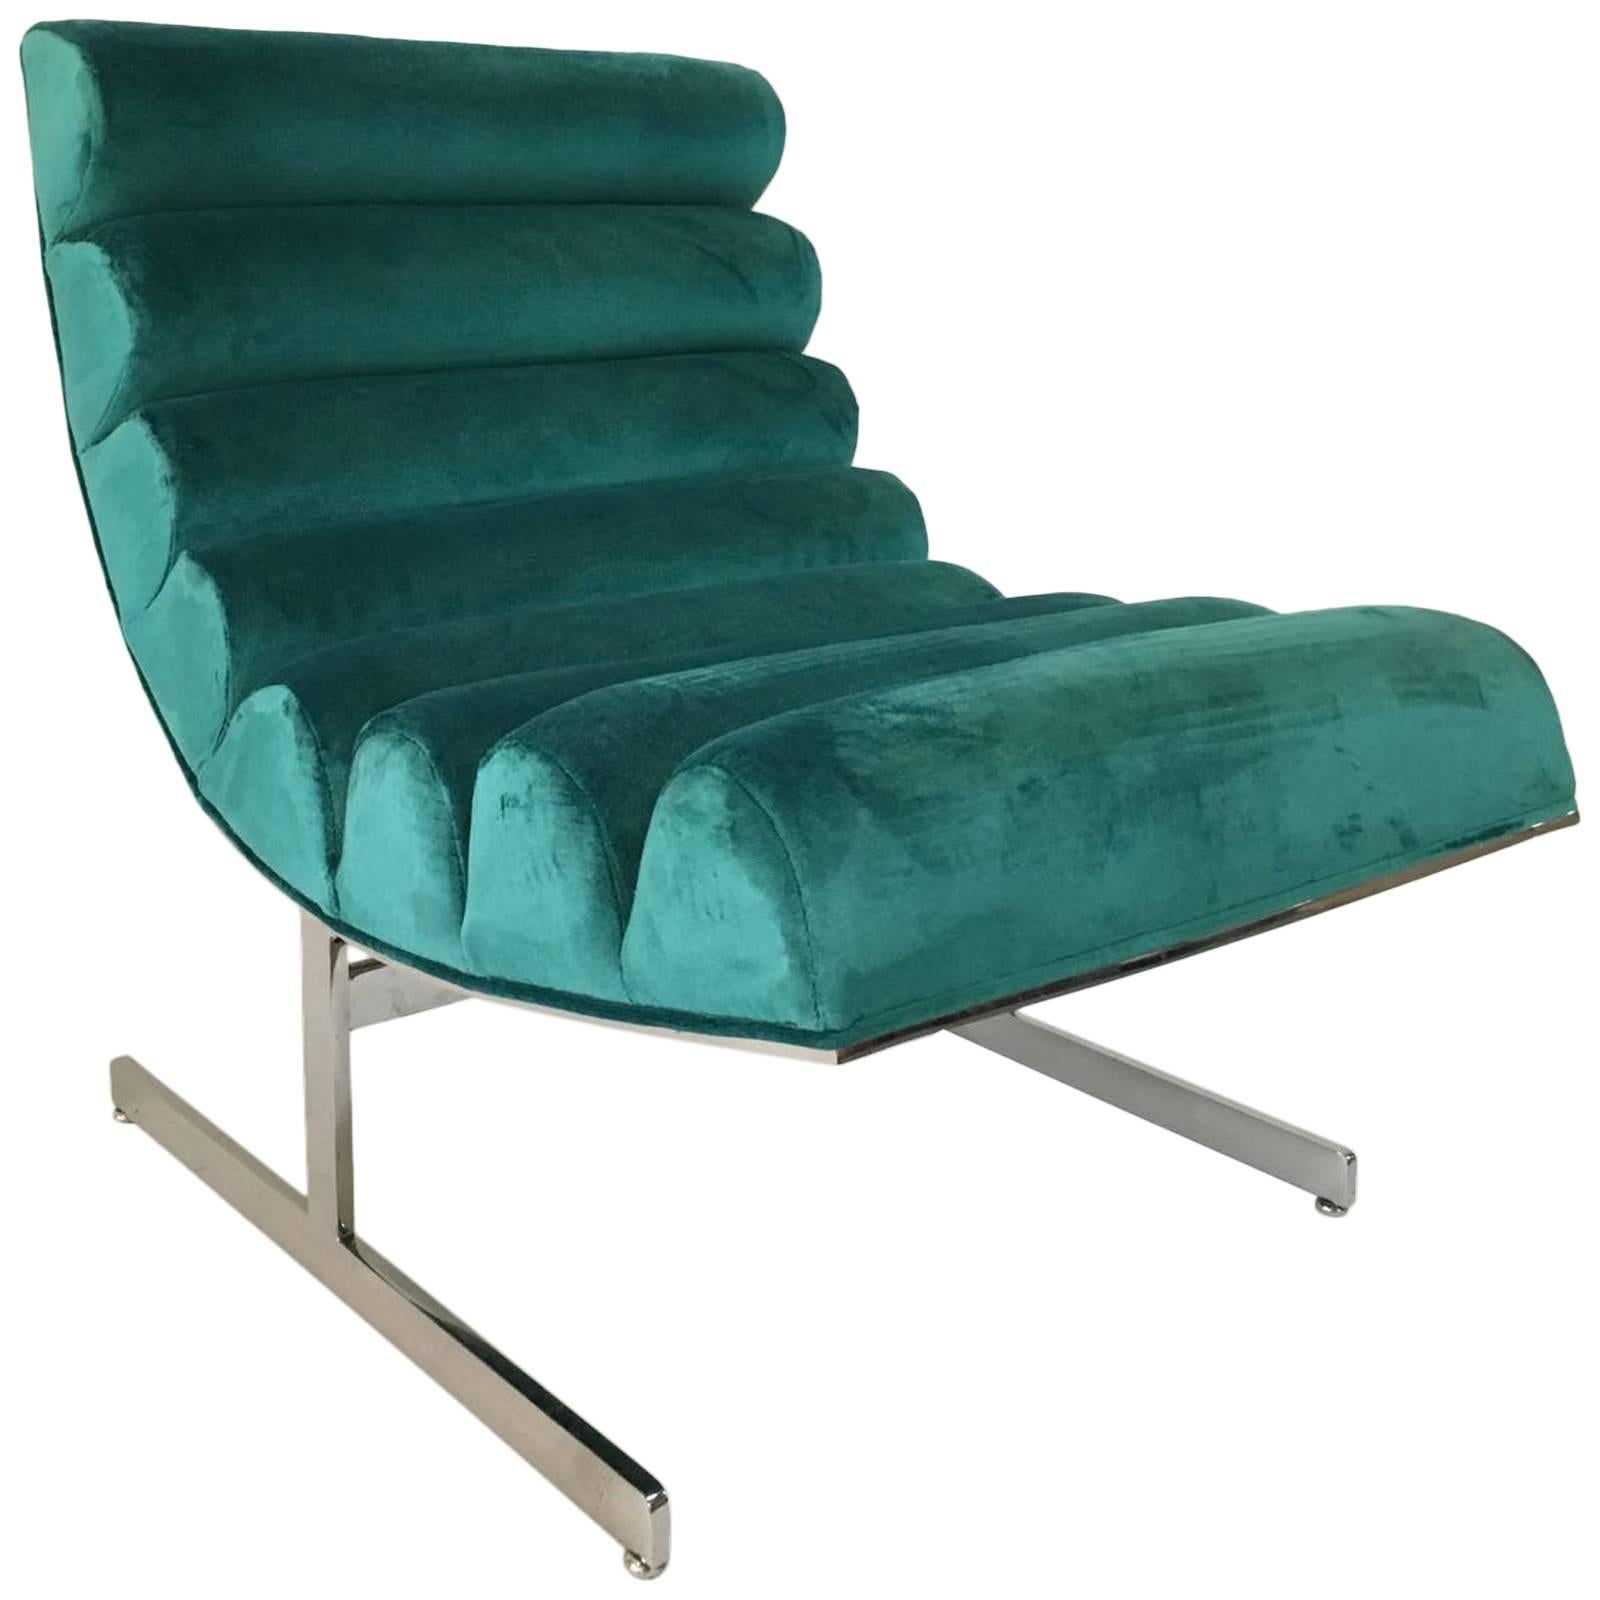 Vintage Lounge Chair by Kipp Stewart for Directional